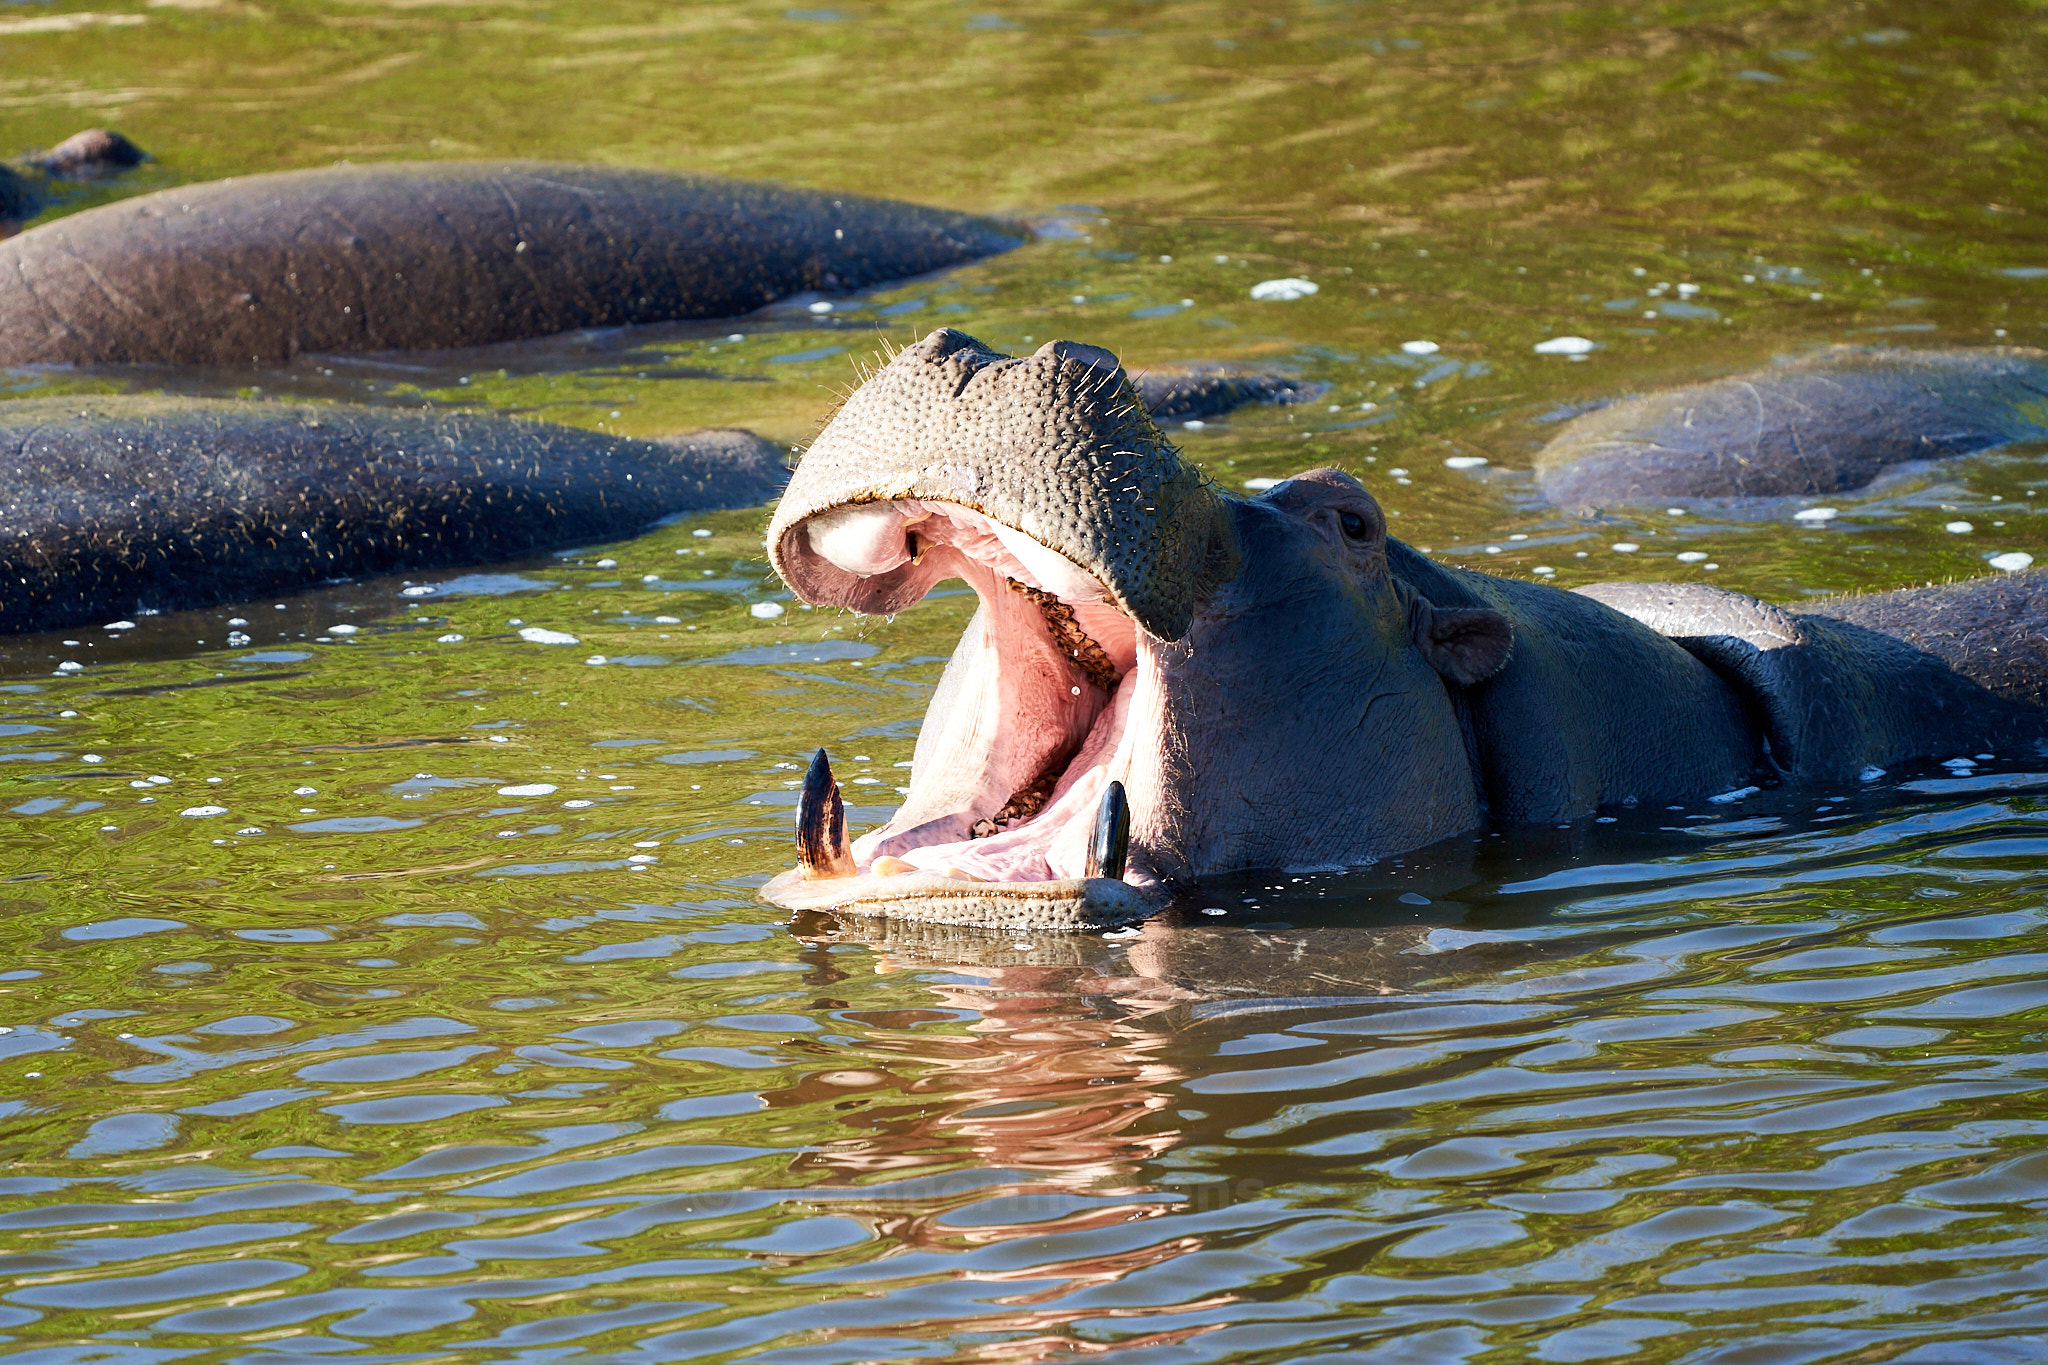 Hippos staying cool in the water showing off their teeth